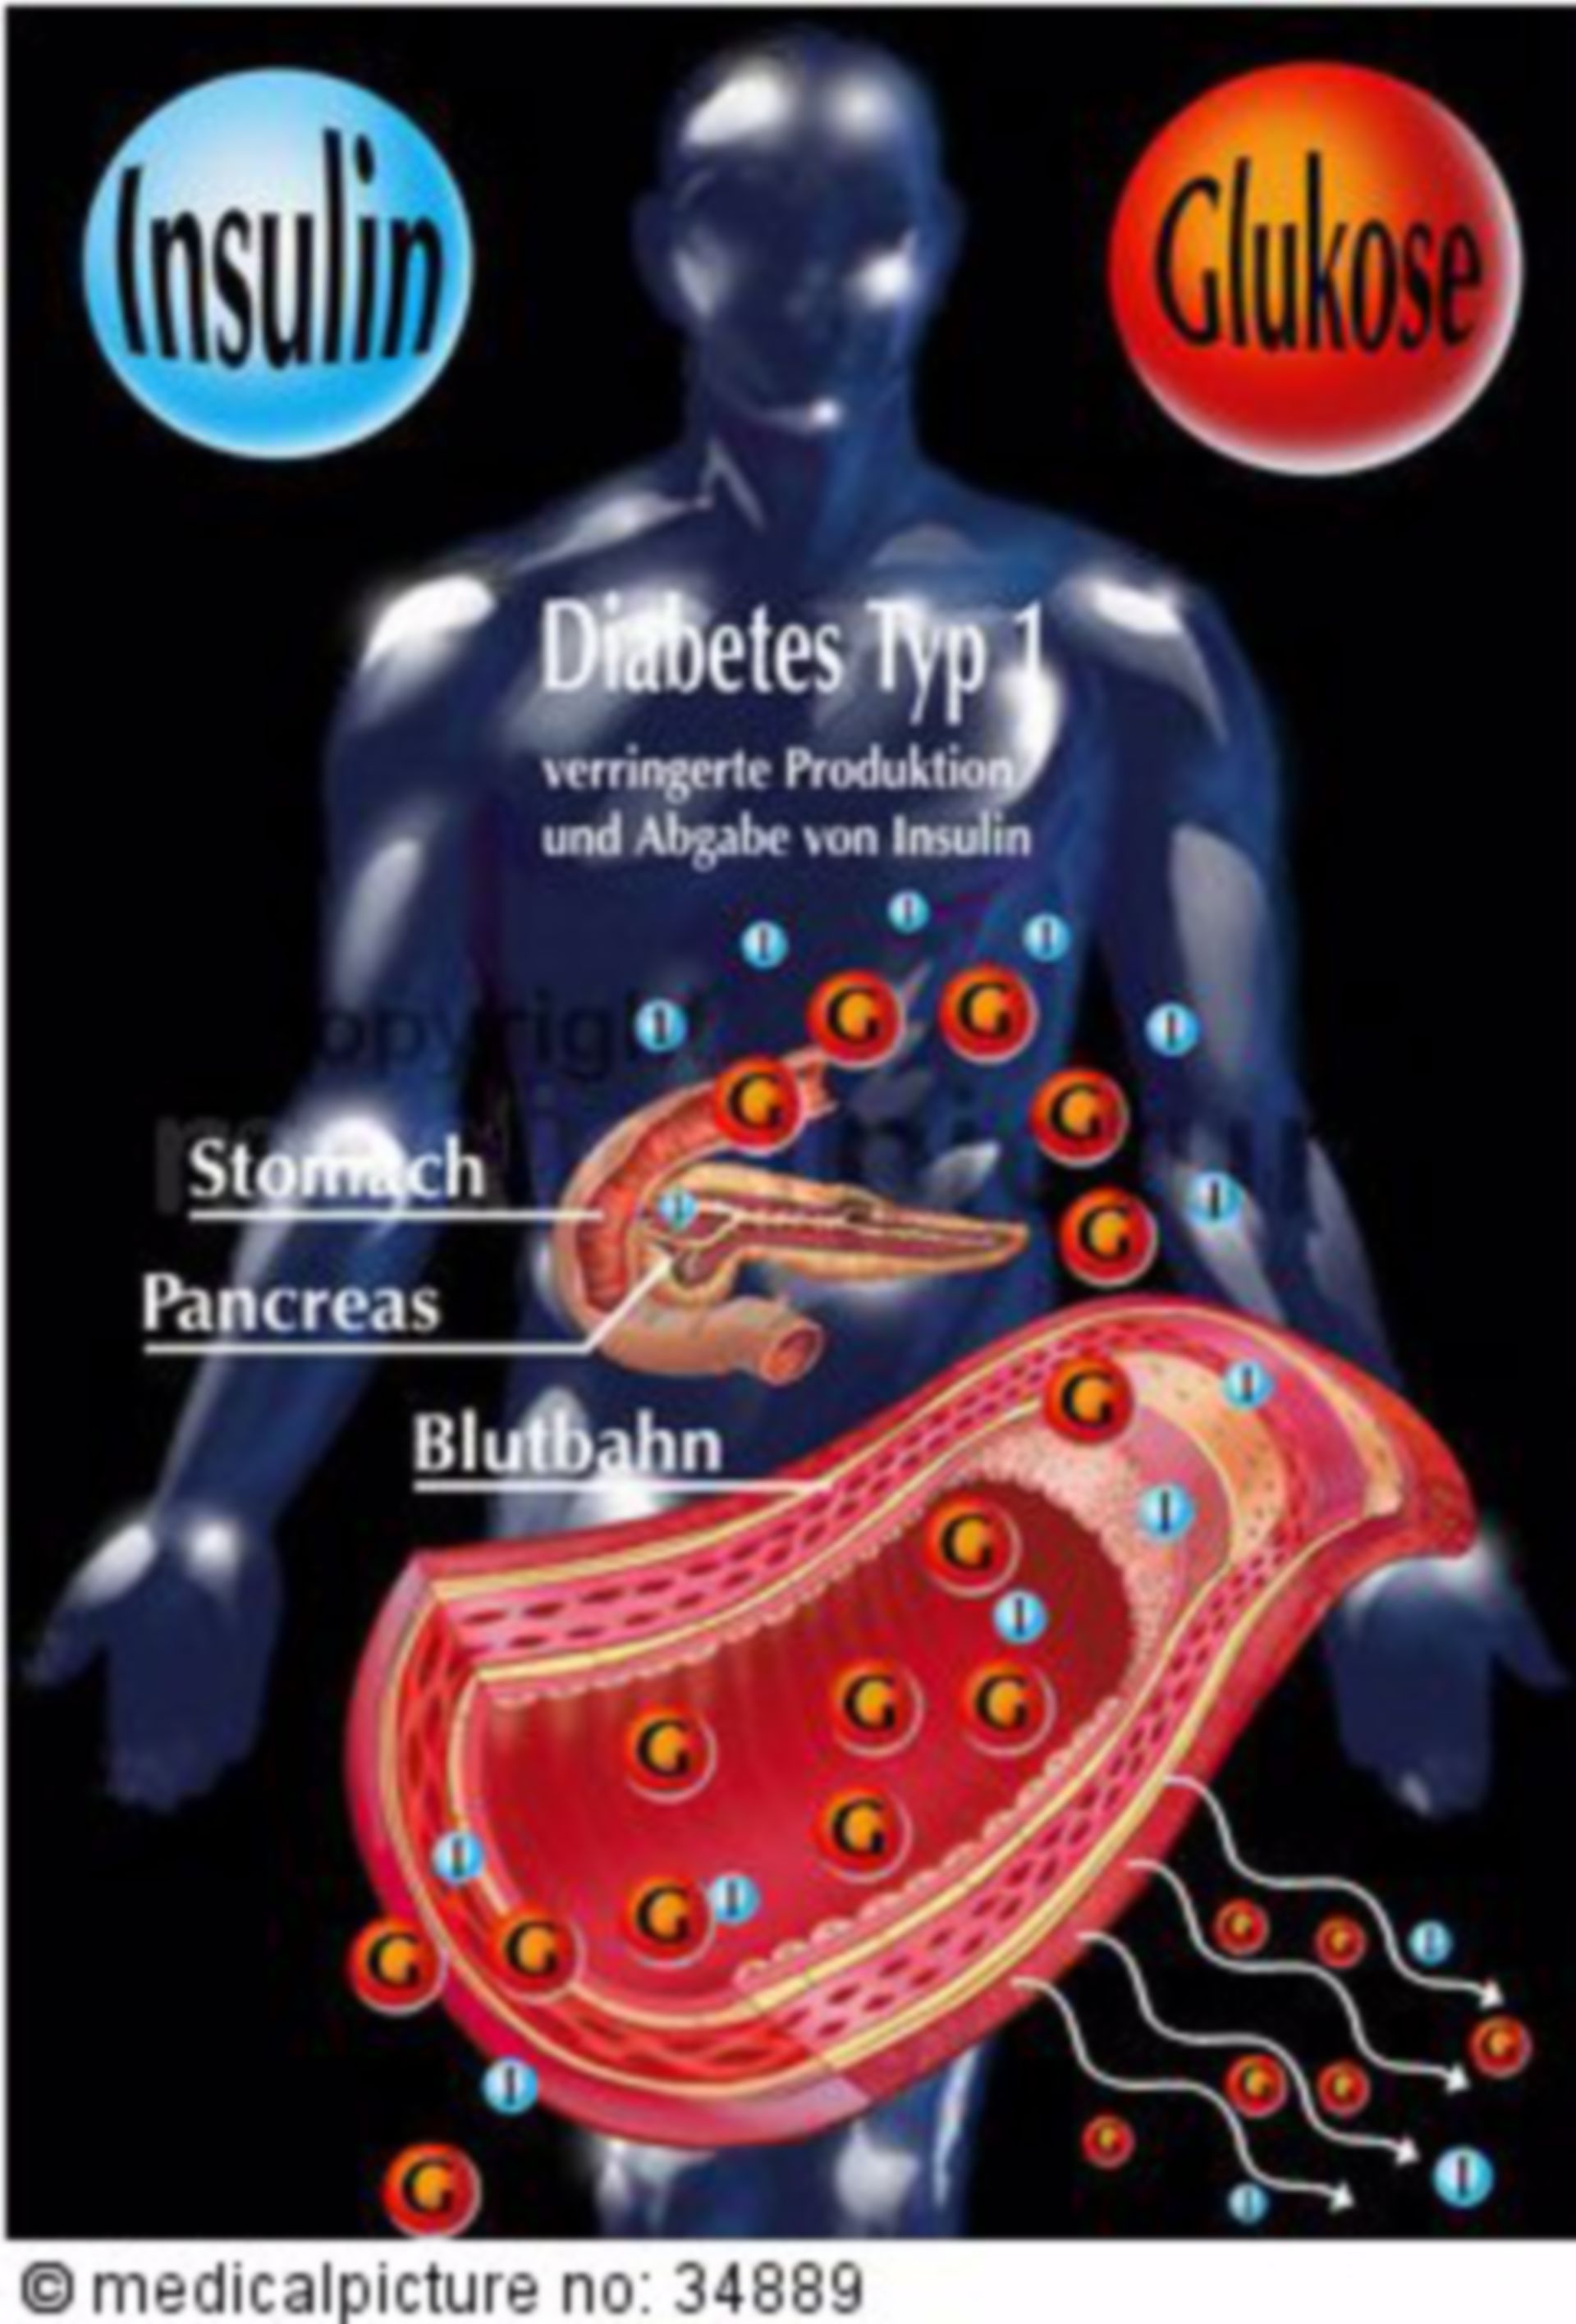 Insulin secretion of people with type I diabetes